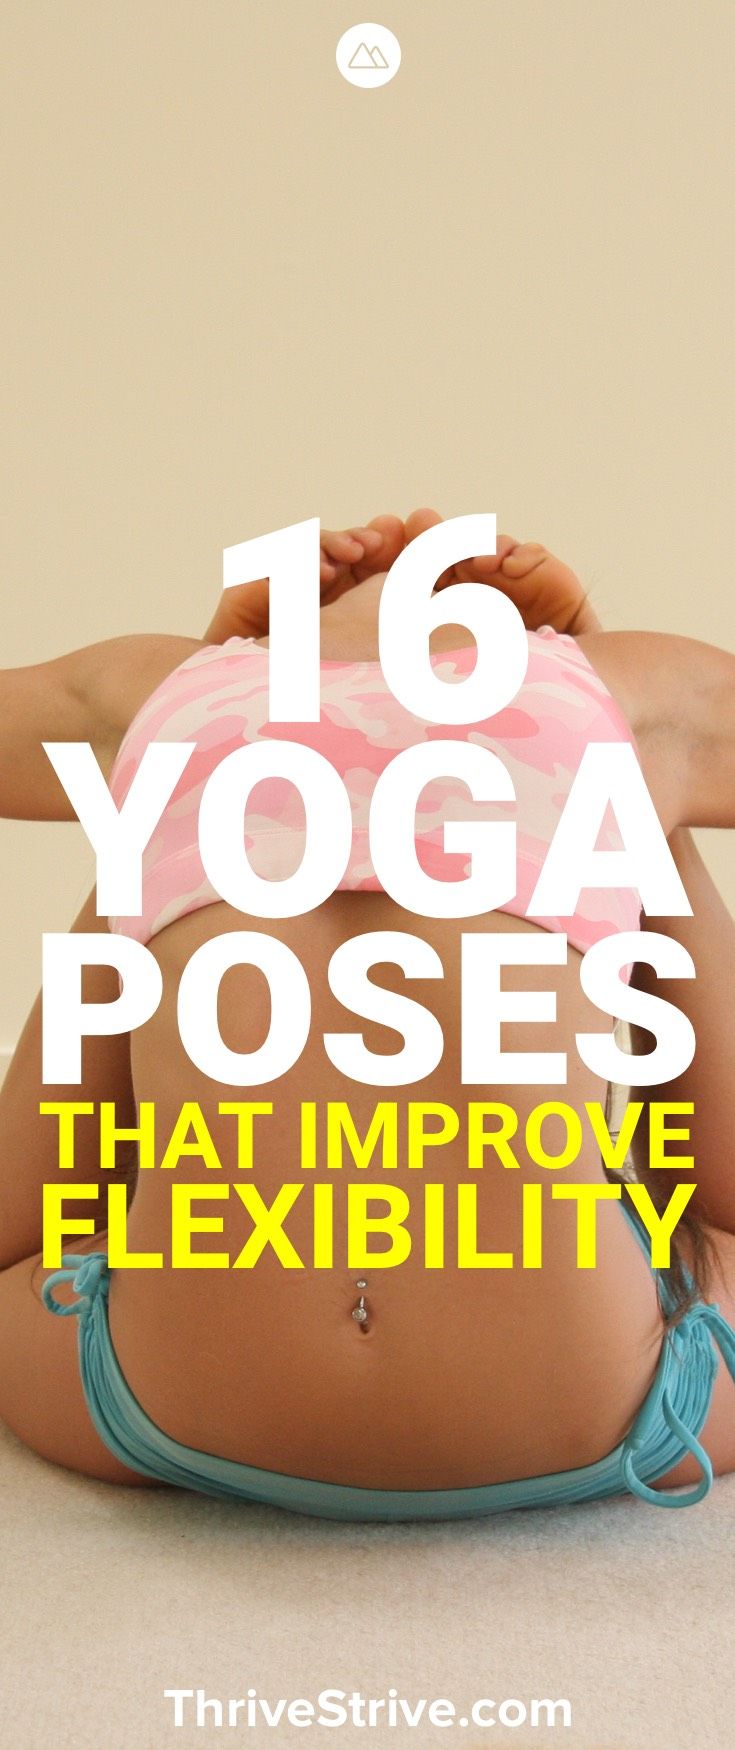 Want to improve your flexibility with yoga? These 16 yoga poses will not only im...